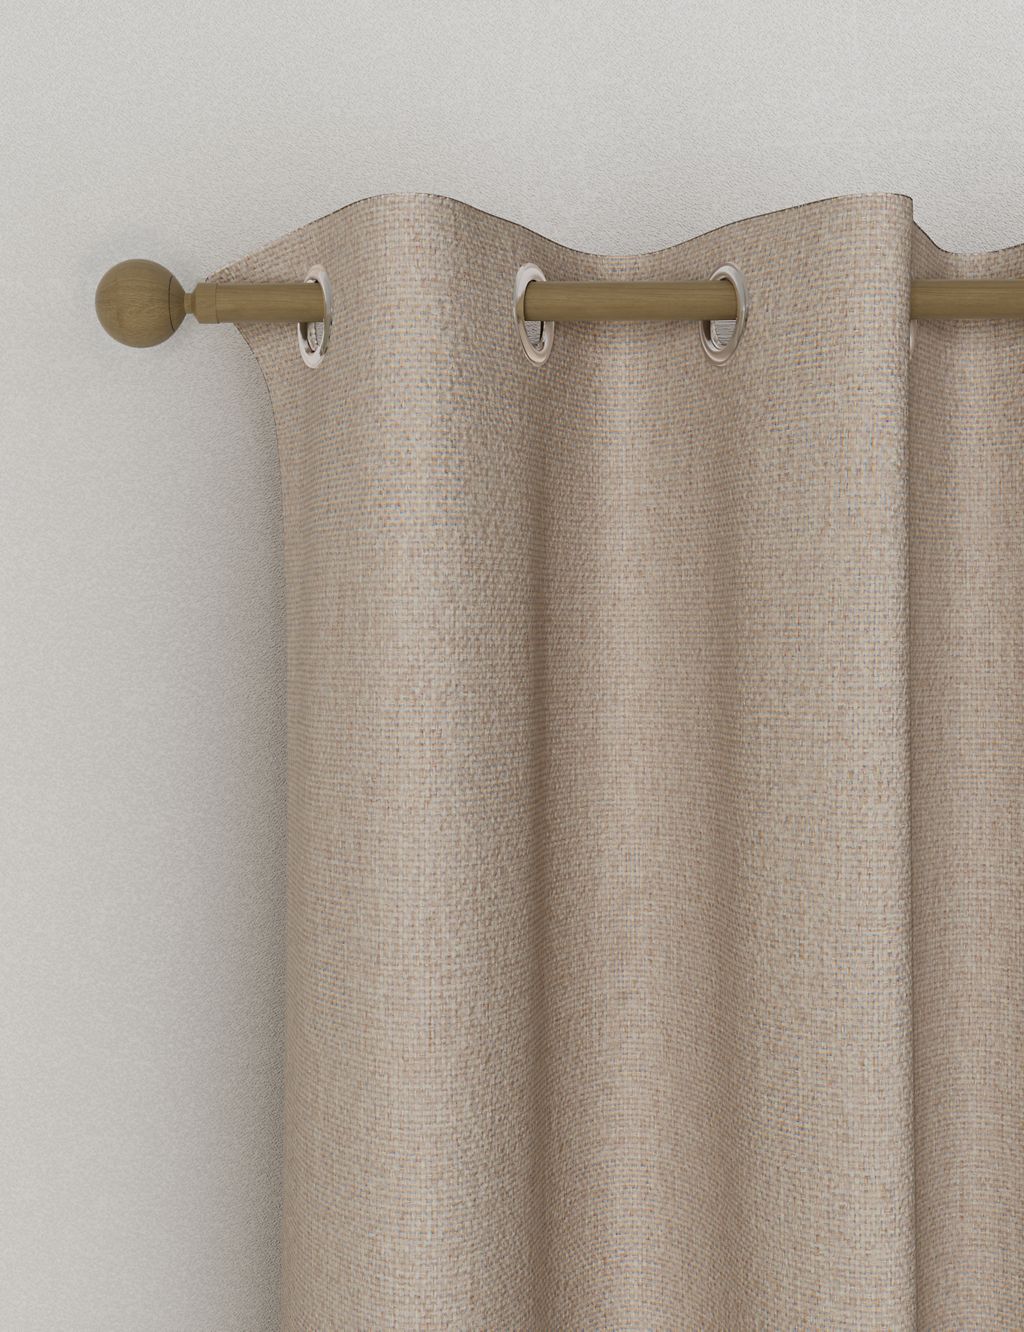 Anti Allergy Eyelet Blackout Temperature Smart Curtains 3 of 6